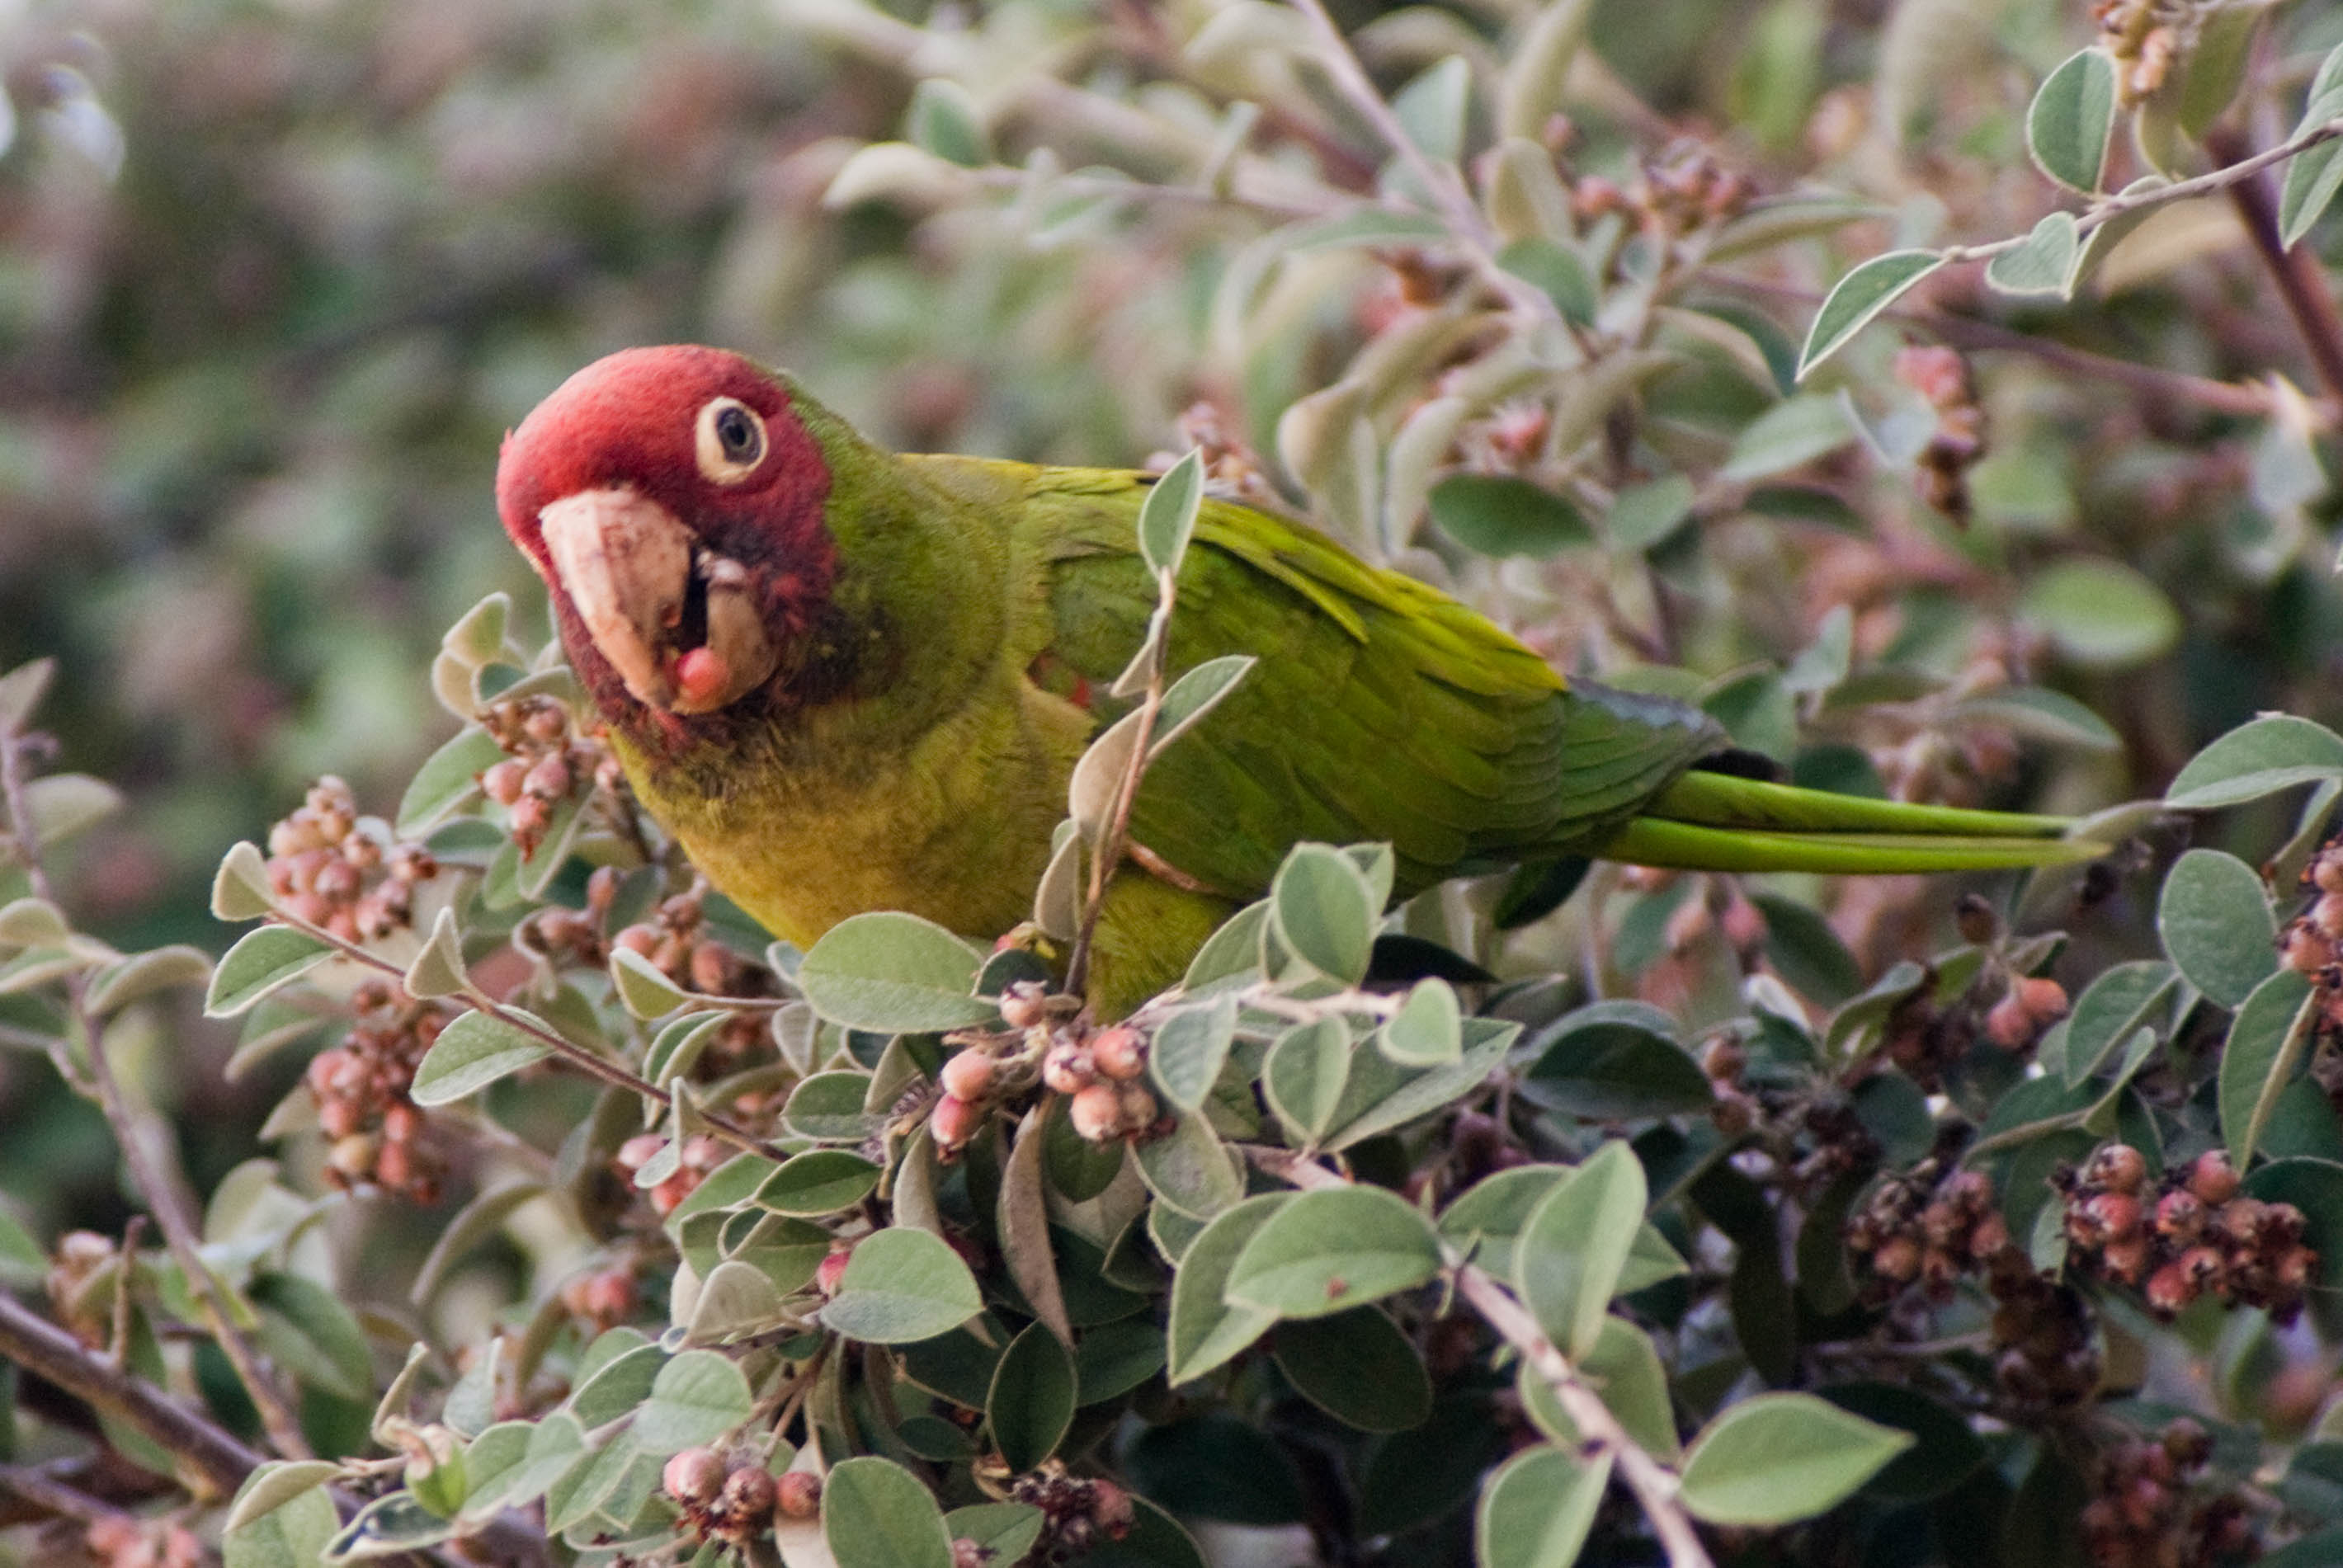 08744 Parrot with berry in mouth